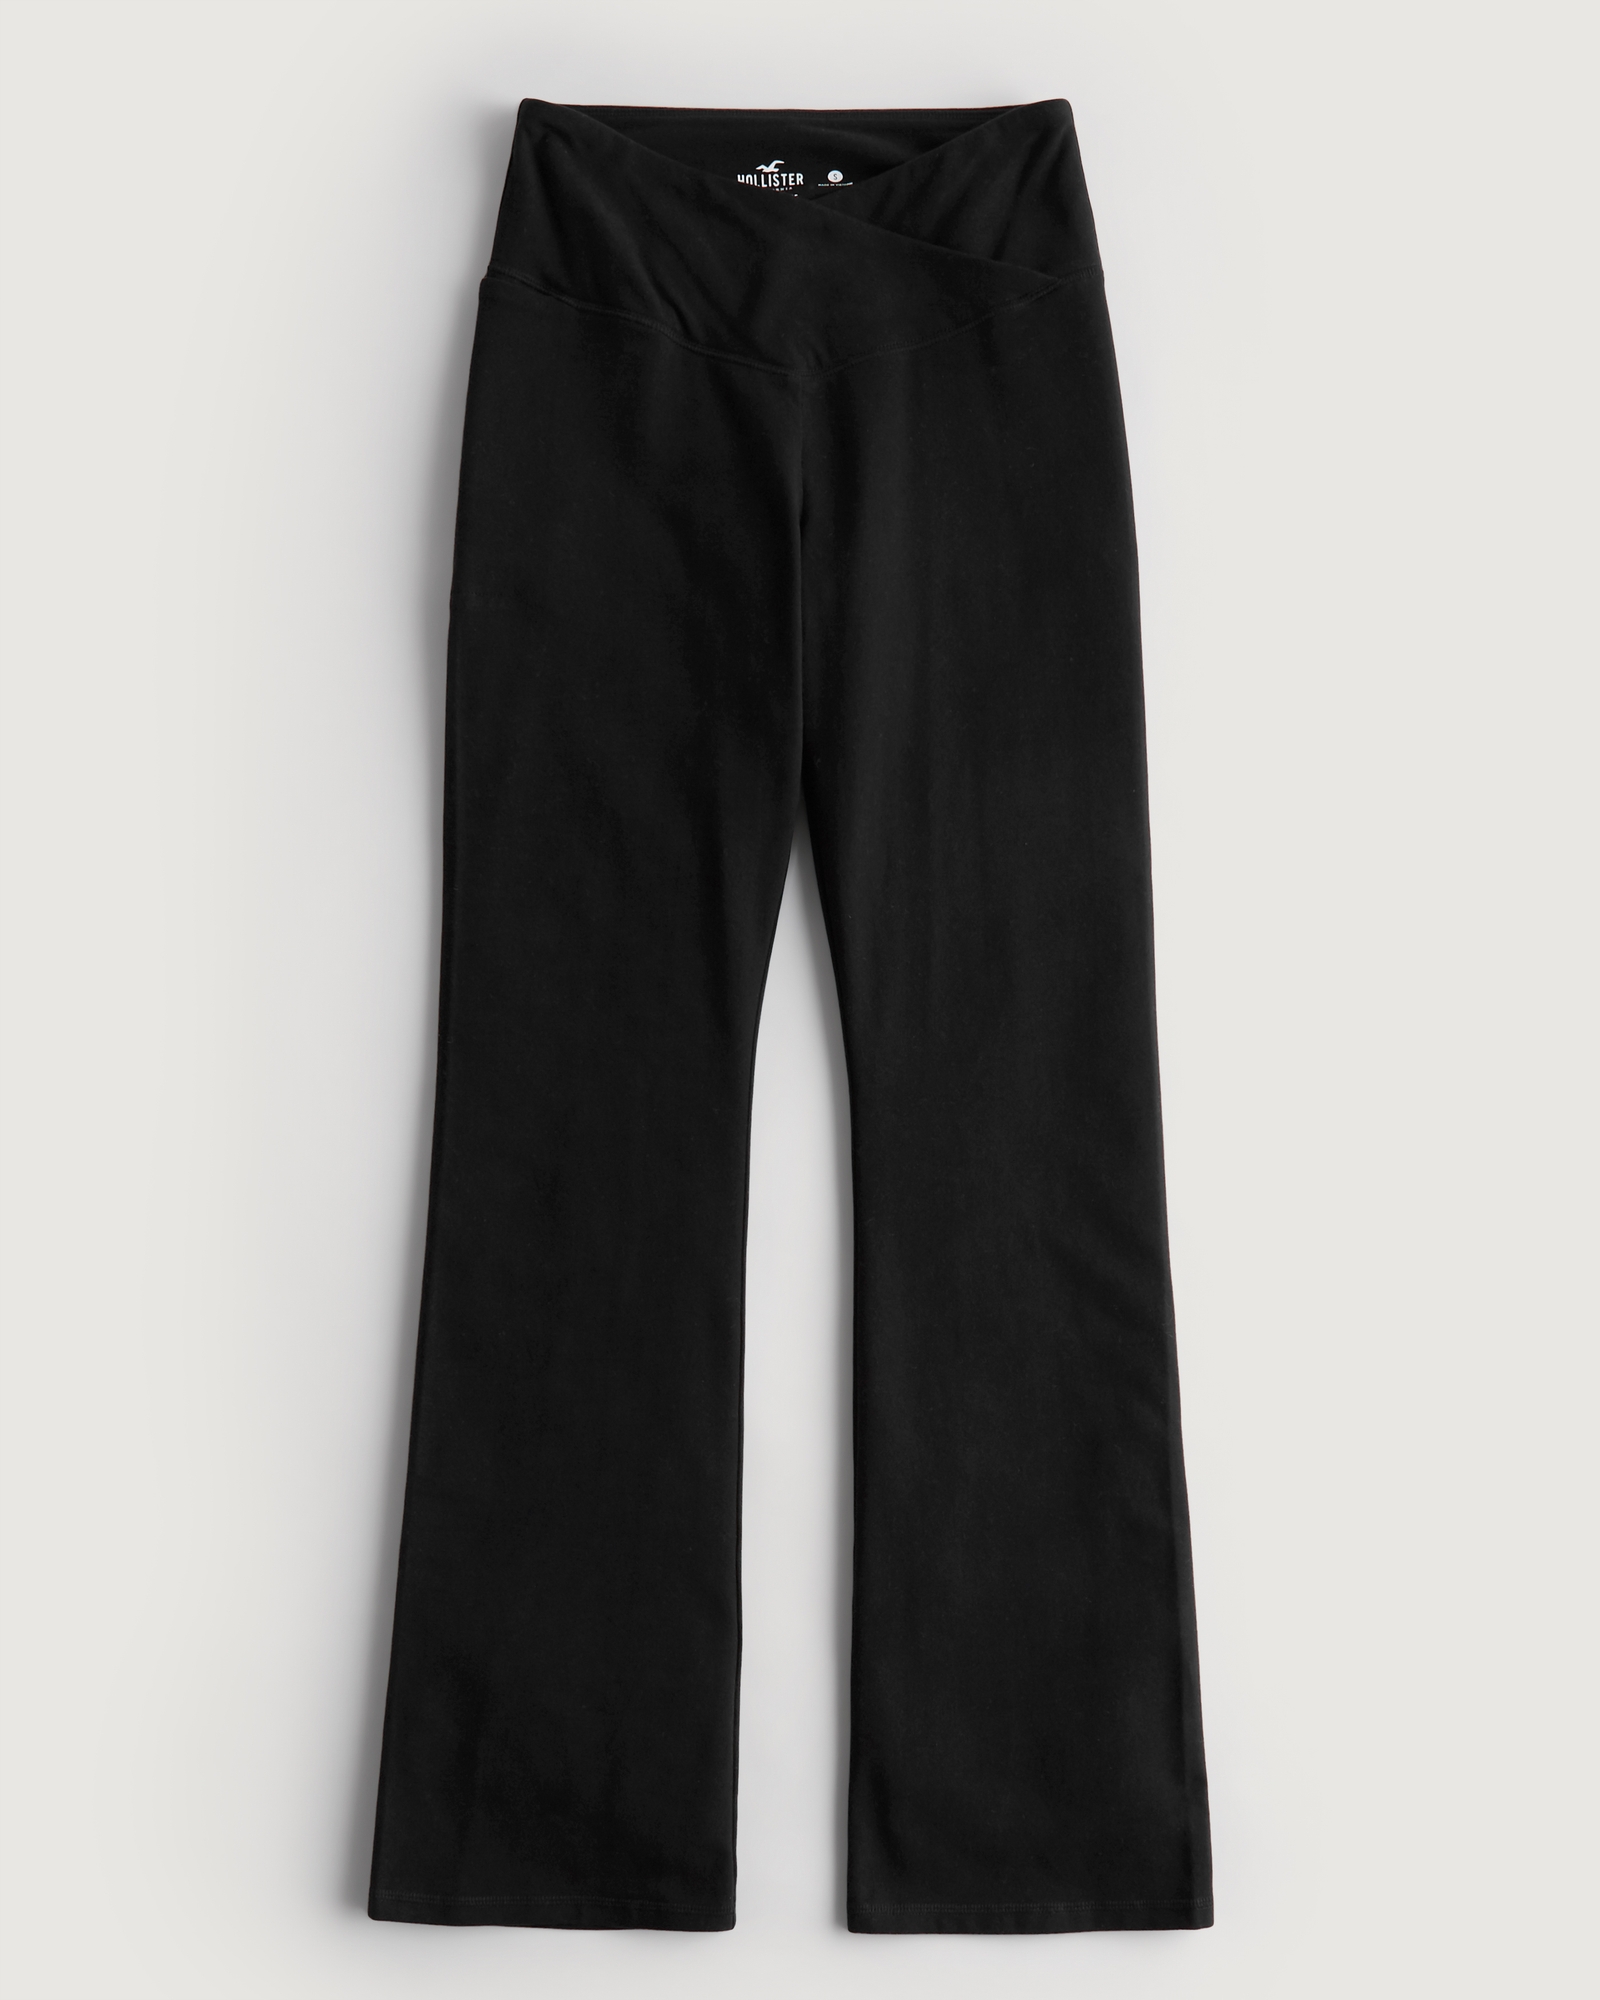 Black Super High Rise Luxe Crossover Bootcut Legging